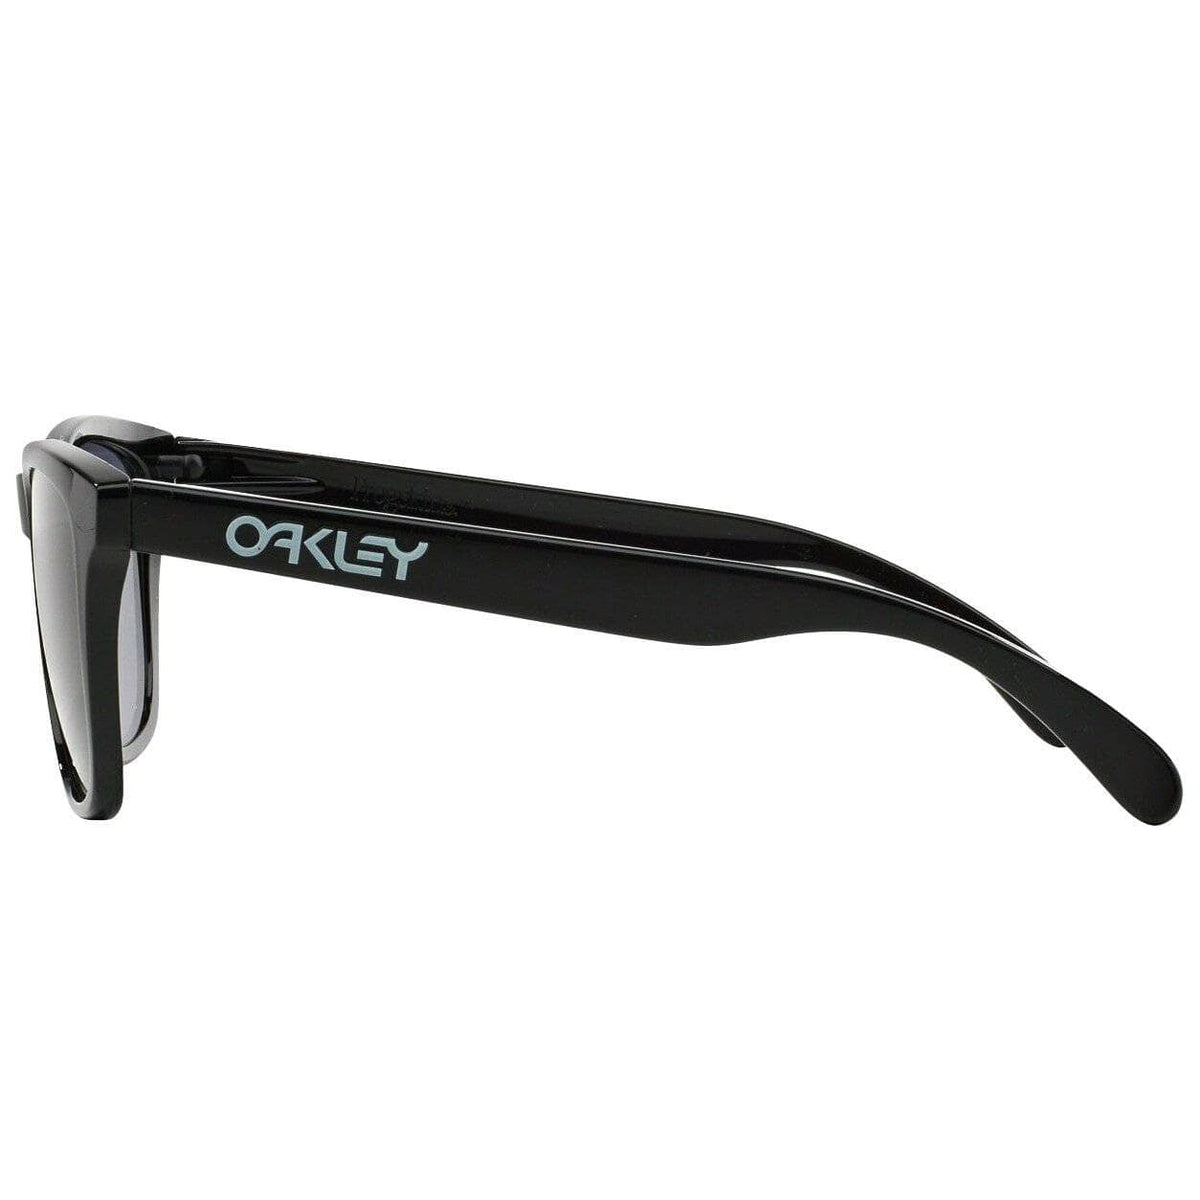 Oakley Frogskins Sunglasses - Polished Black - Grey Round Sunglasses by Oakley O/S (one size)